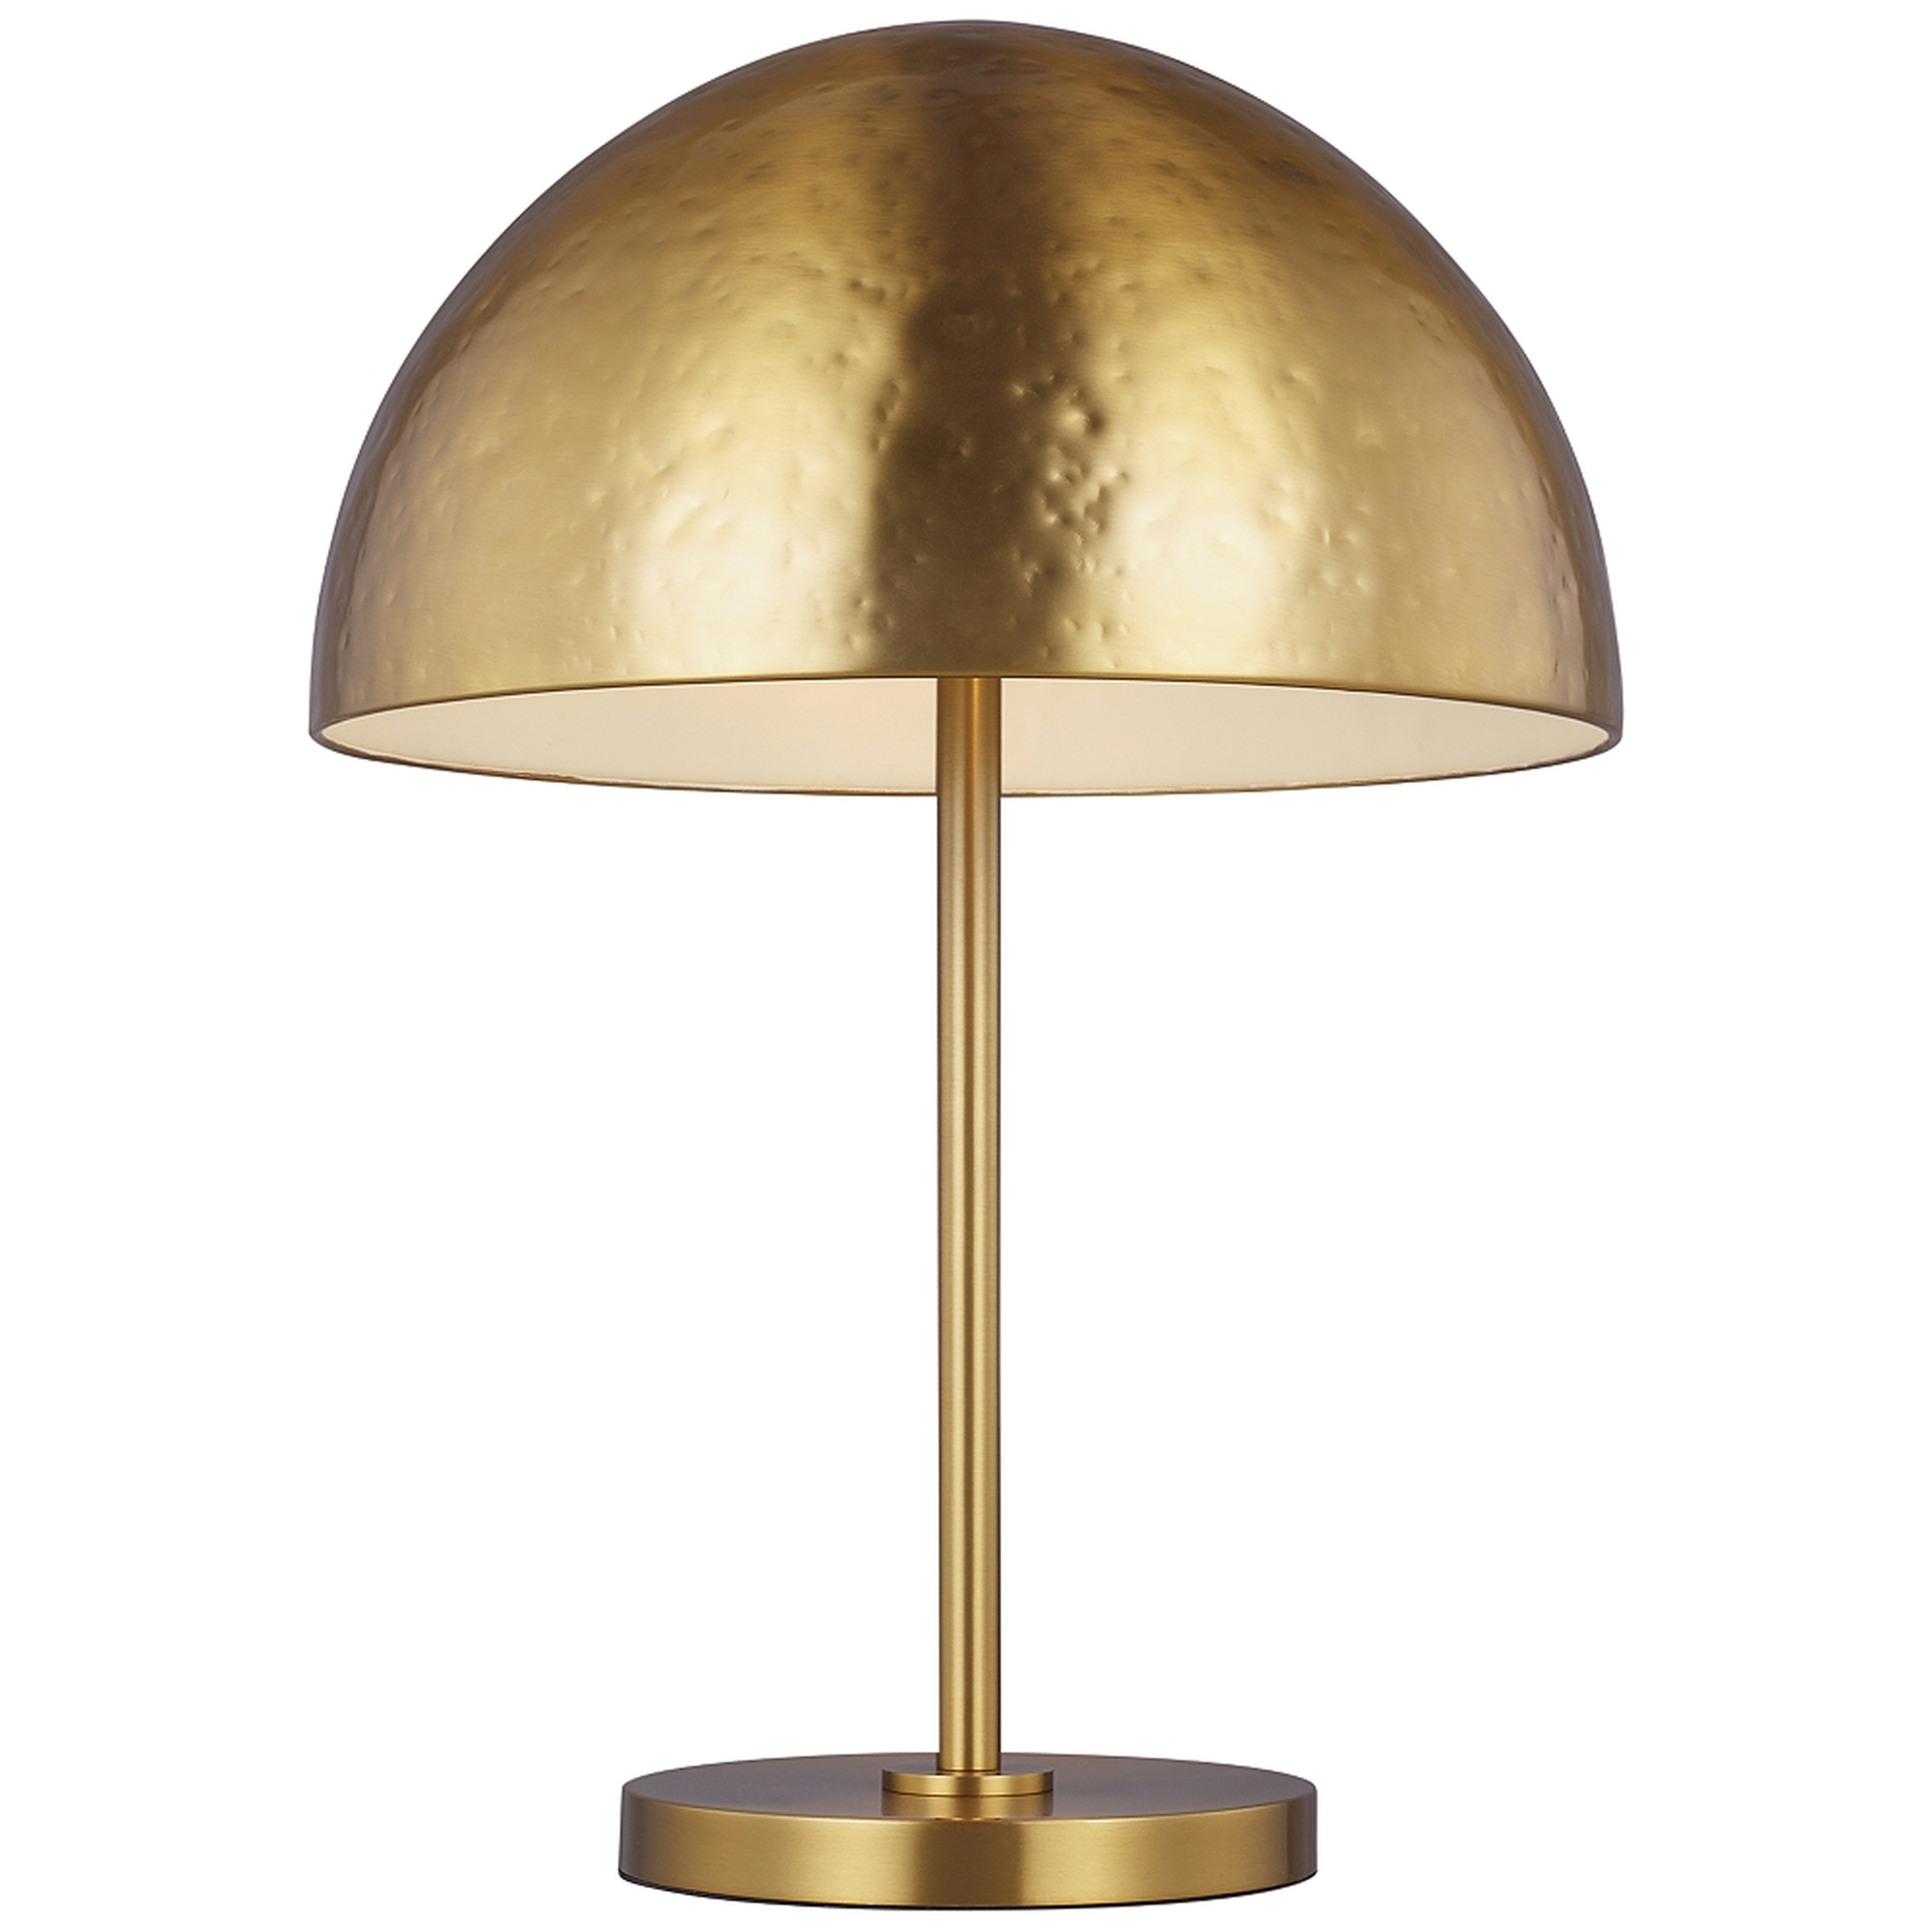 Whare Burnished Brass Dome LED Table Lamp - Style # 97D96 - Lamps Plus